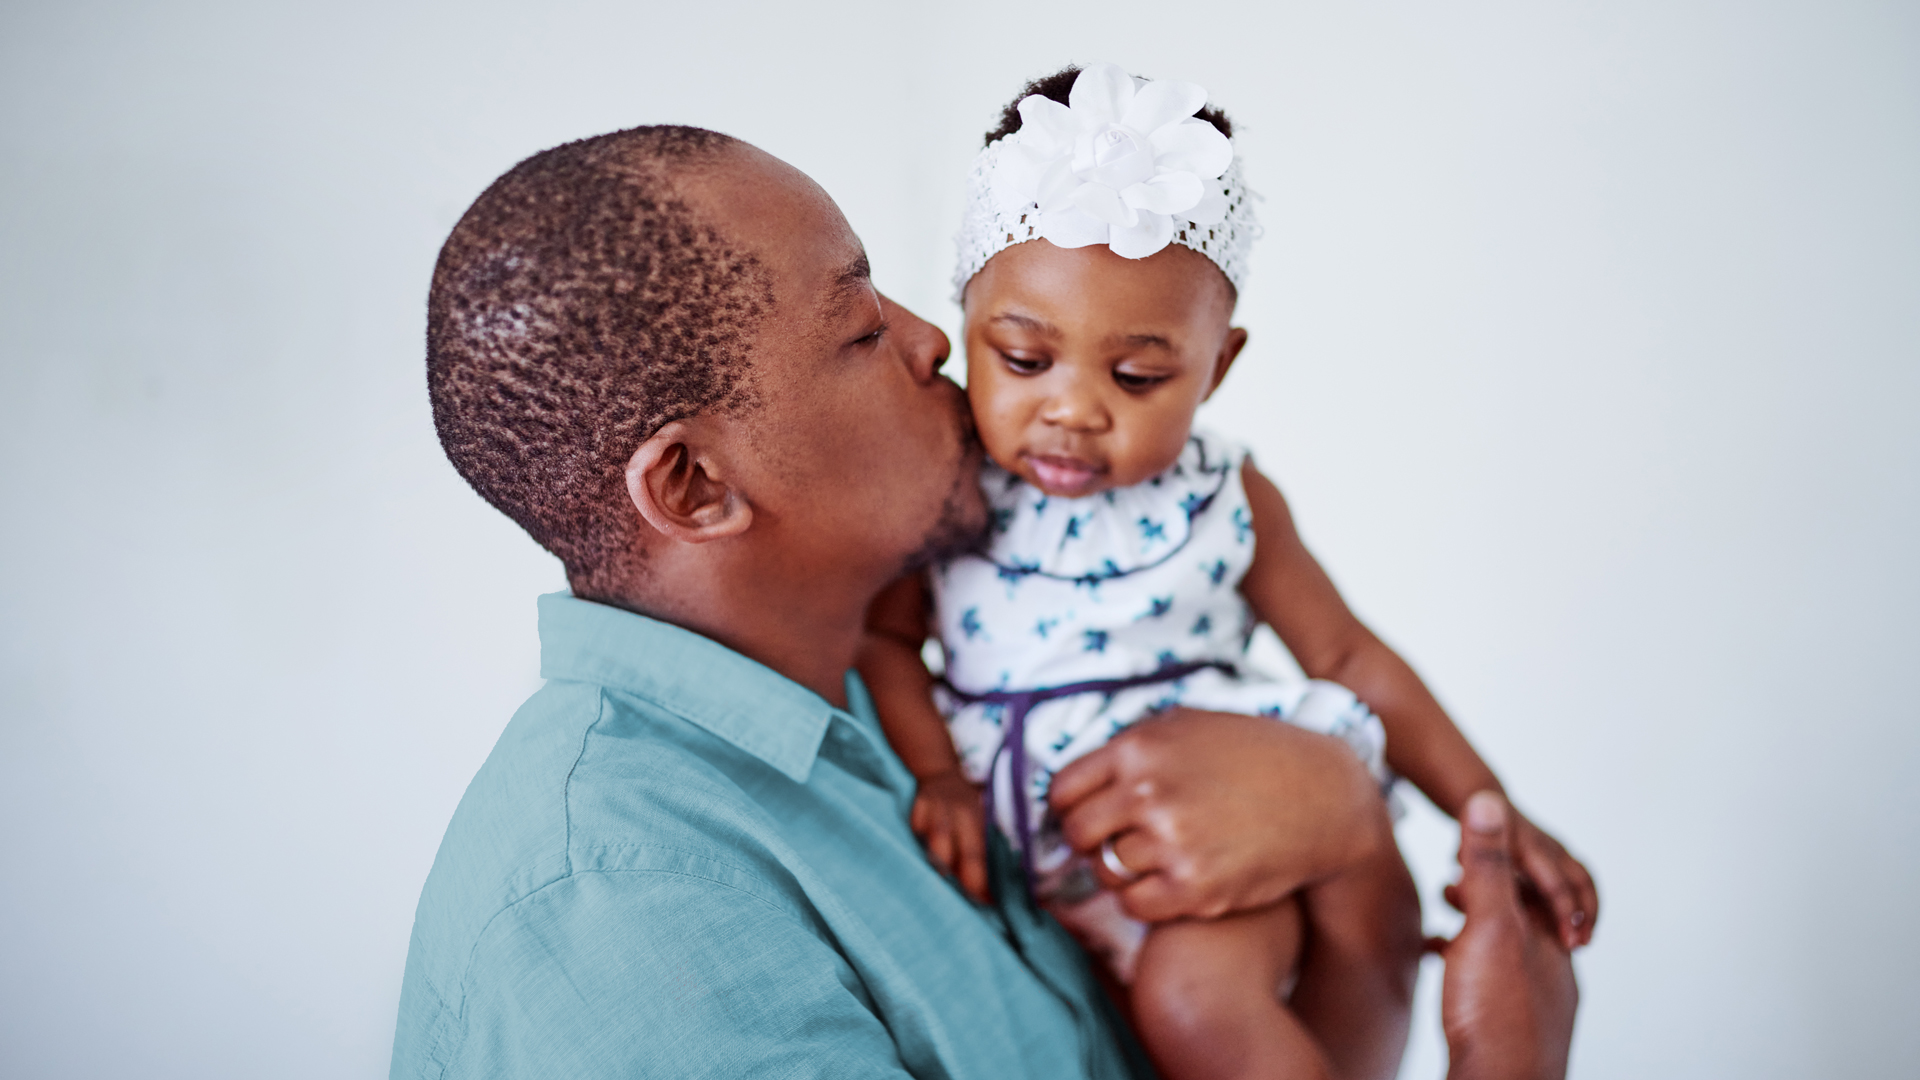 African American man in a light blue shirt holding a toddler and kissing her on the cheek